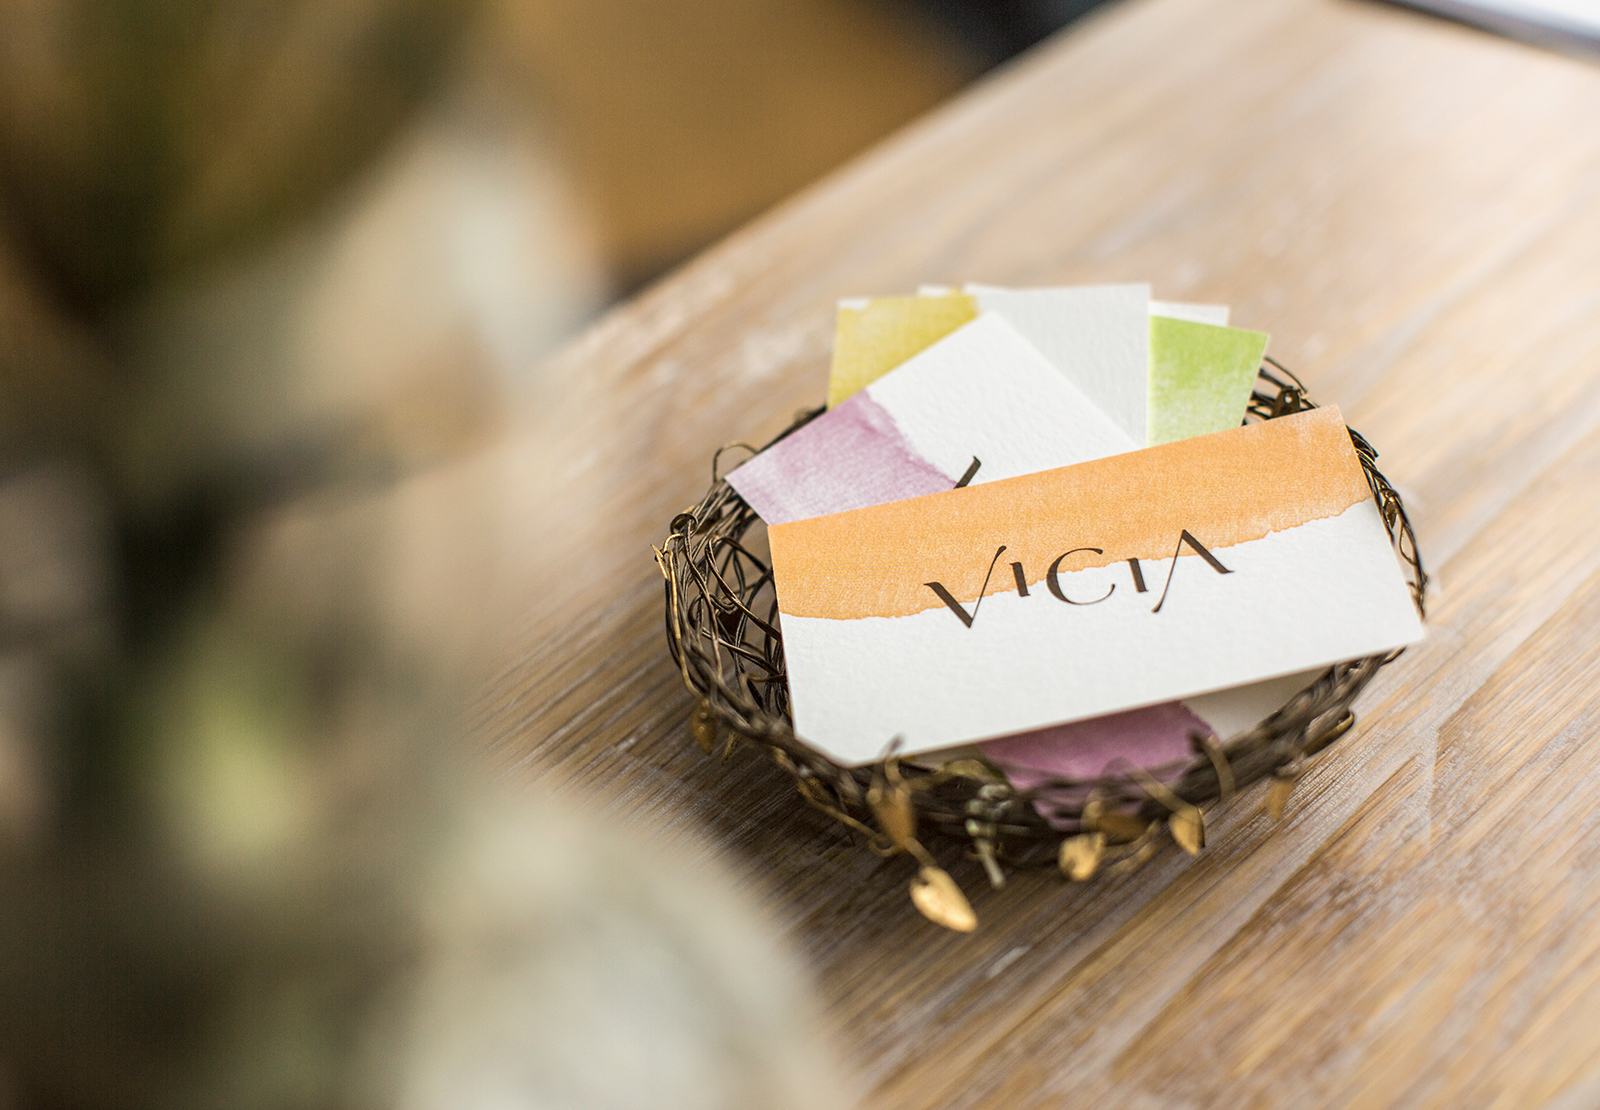 Vicia business cards in basket